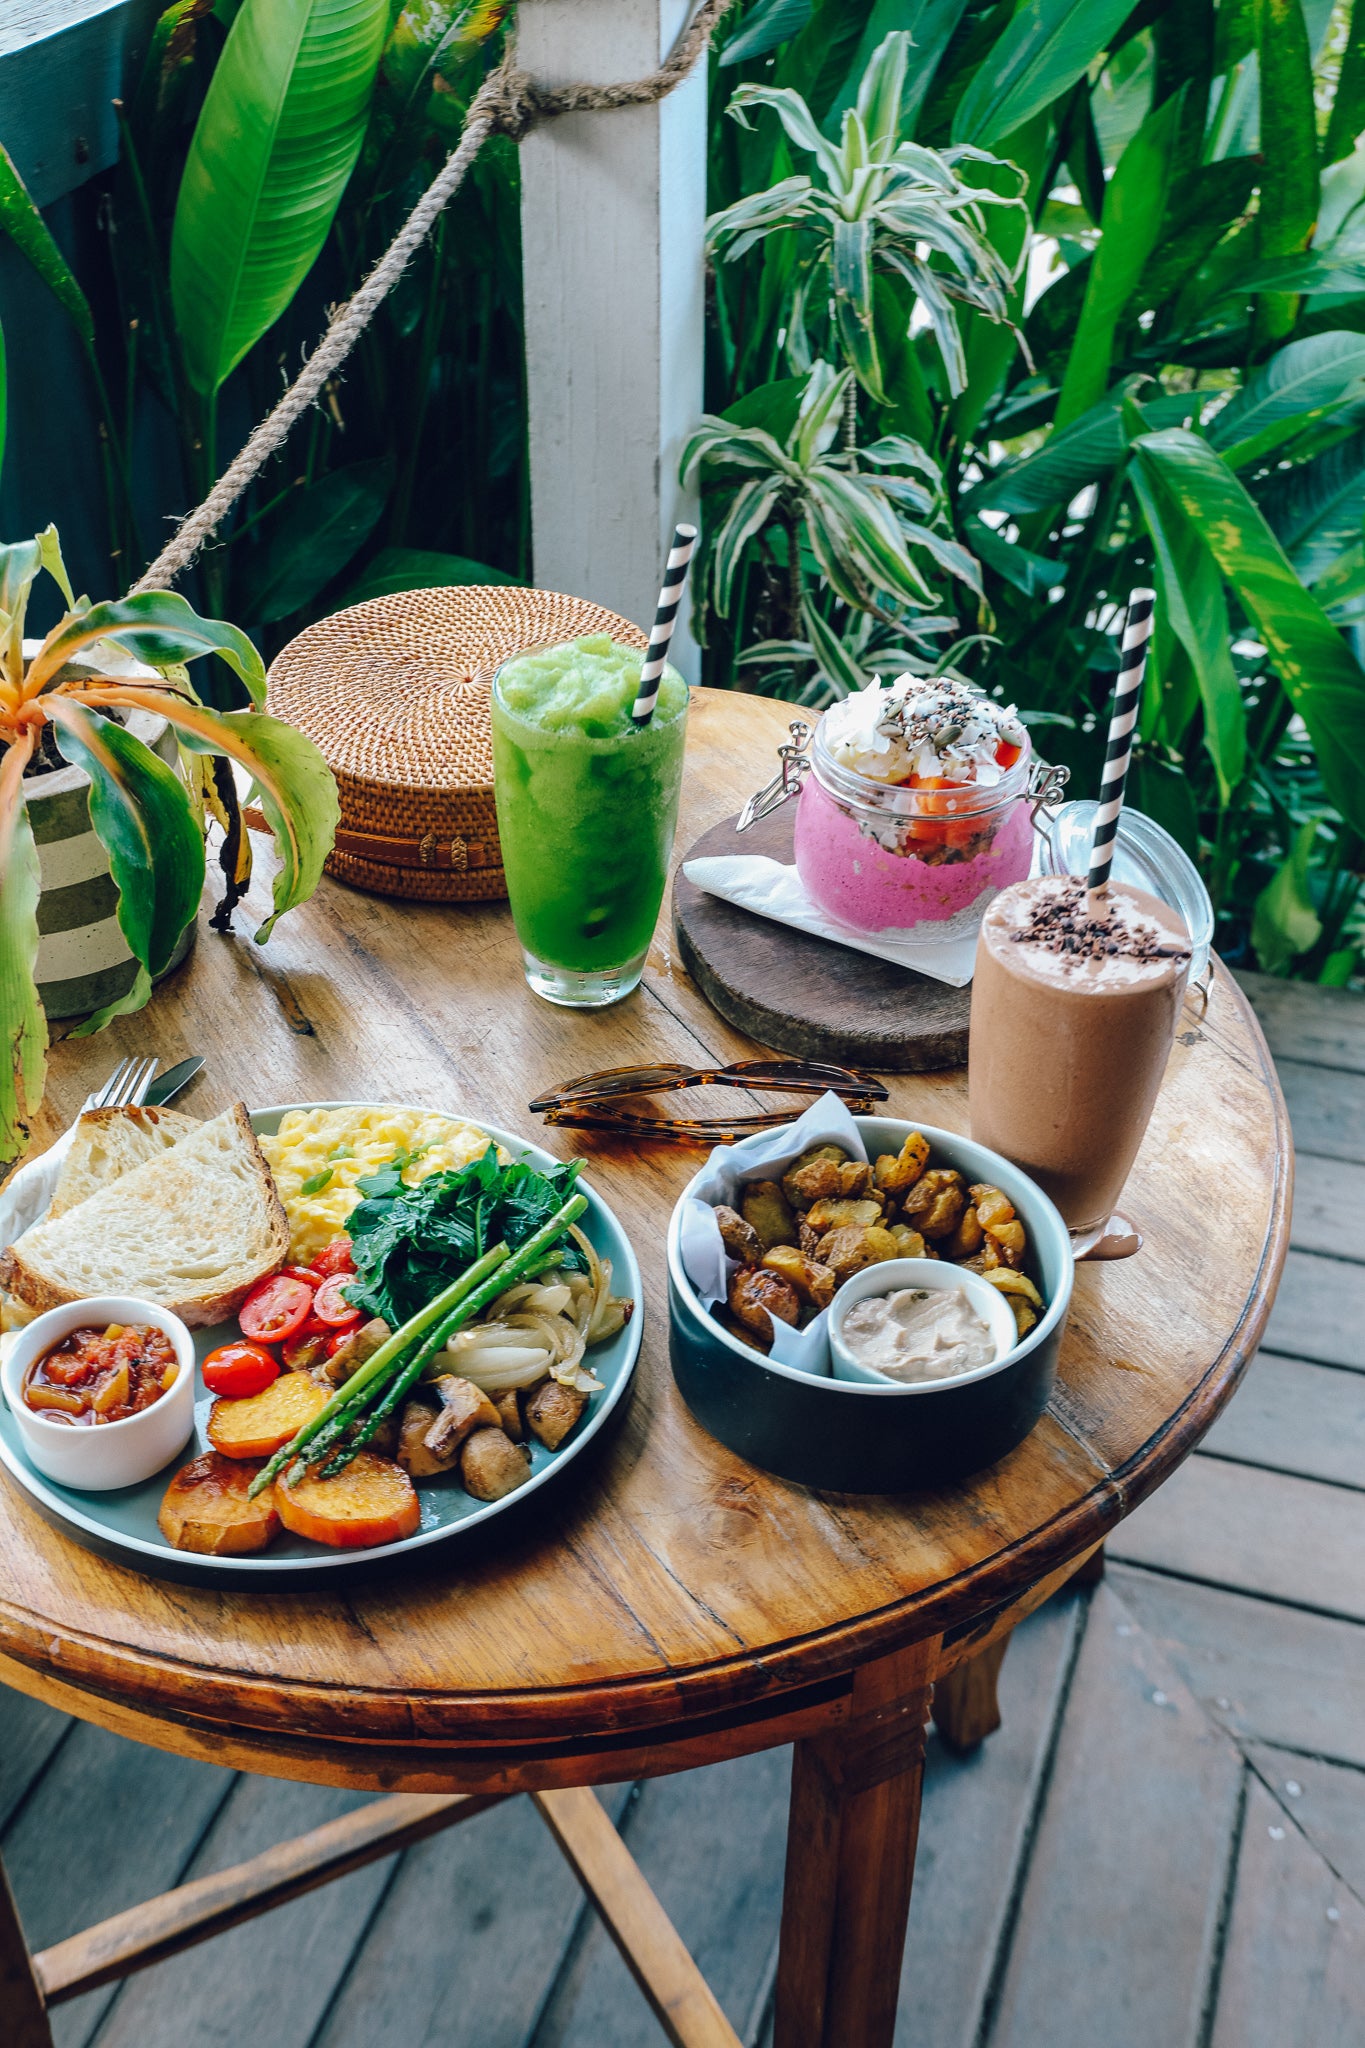 Where to Eat in Bali